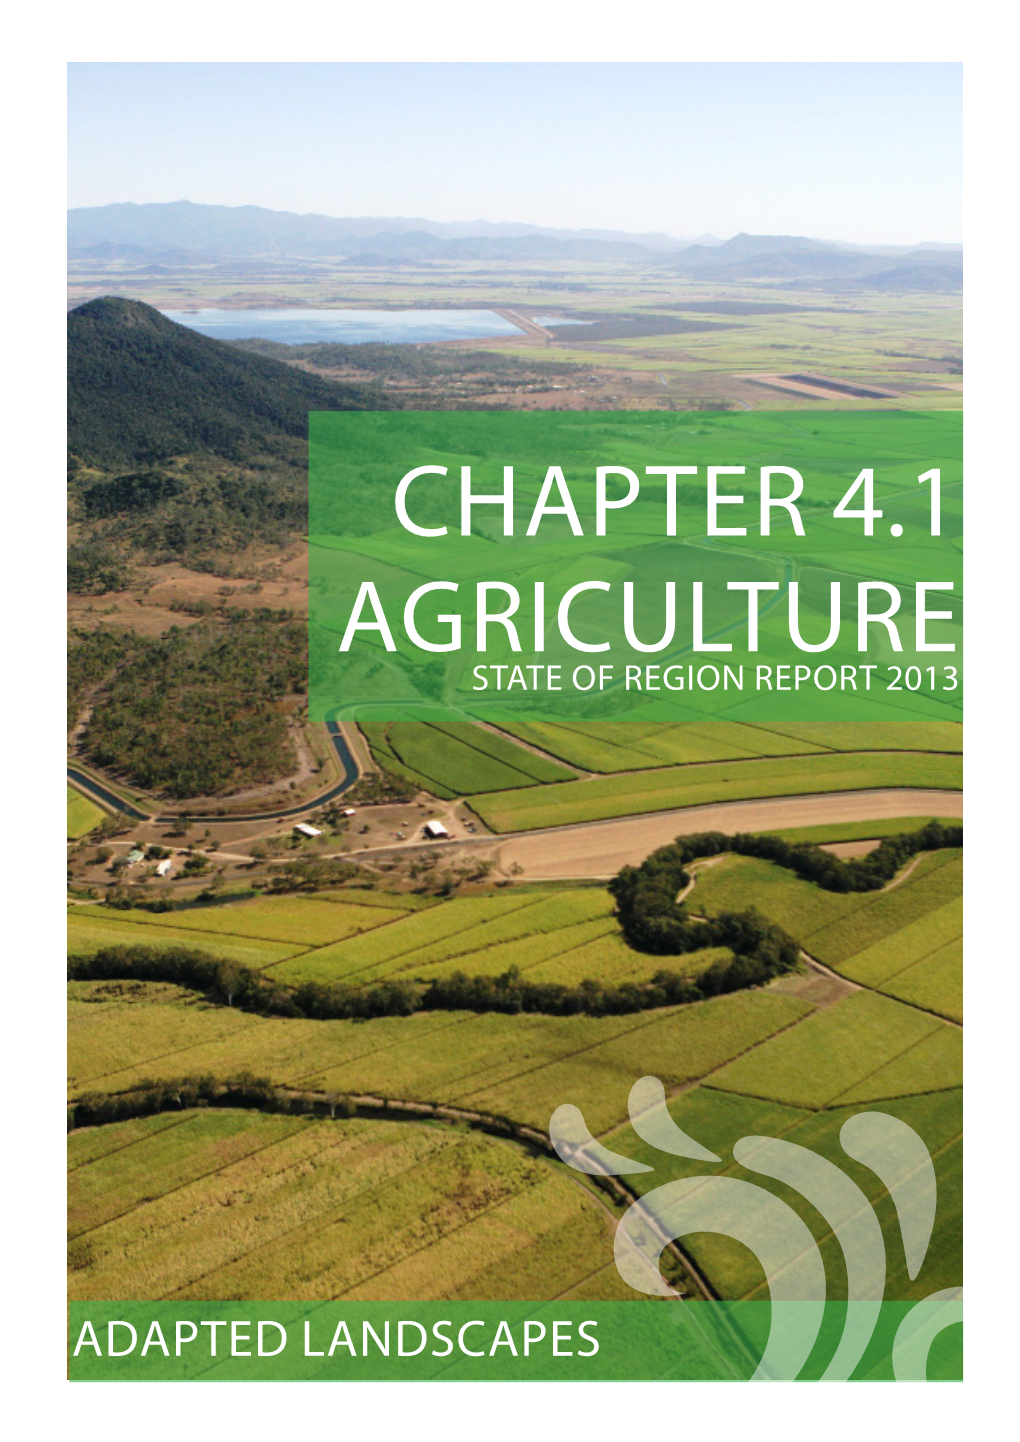 Chapter 4.1 Agriculture State of Region Report 2013